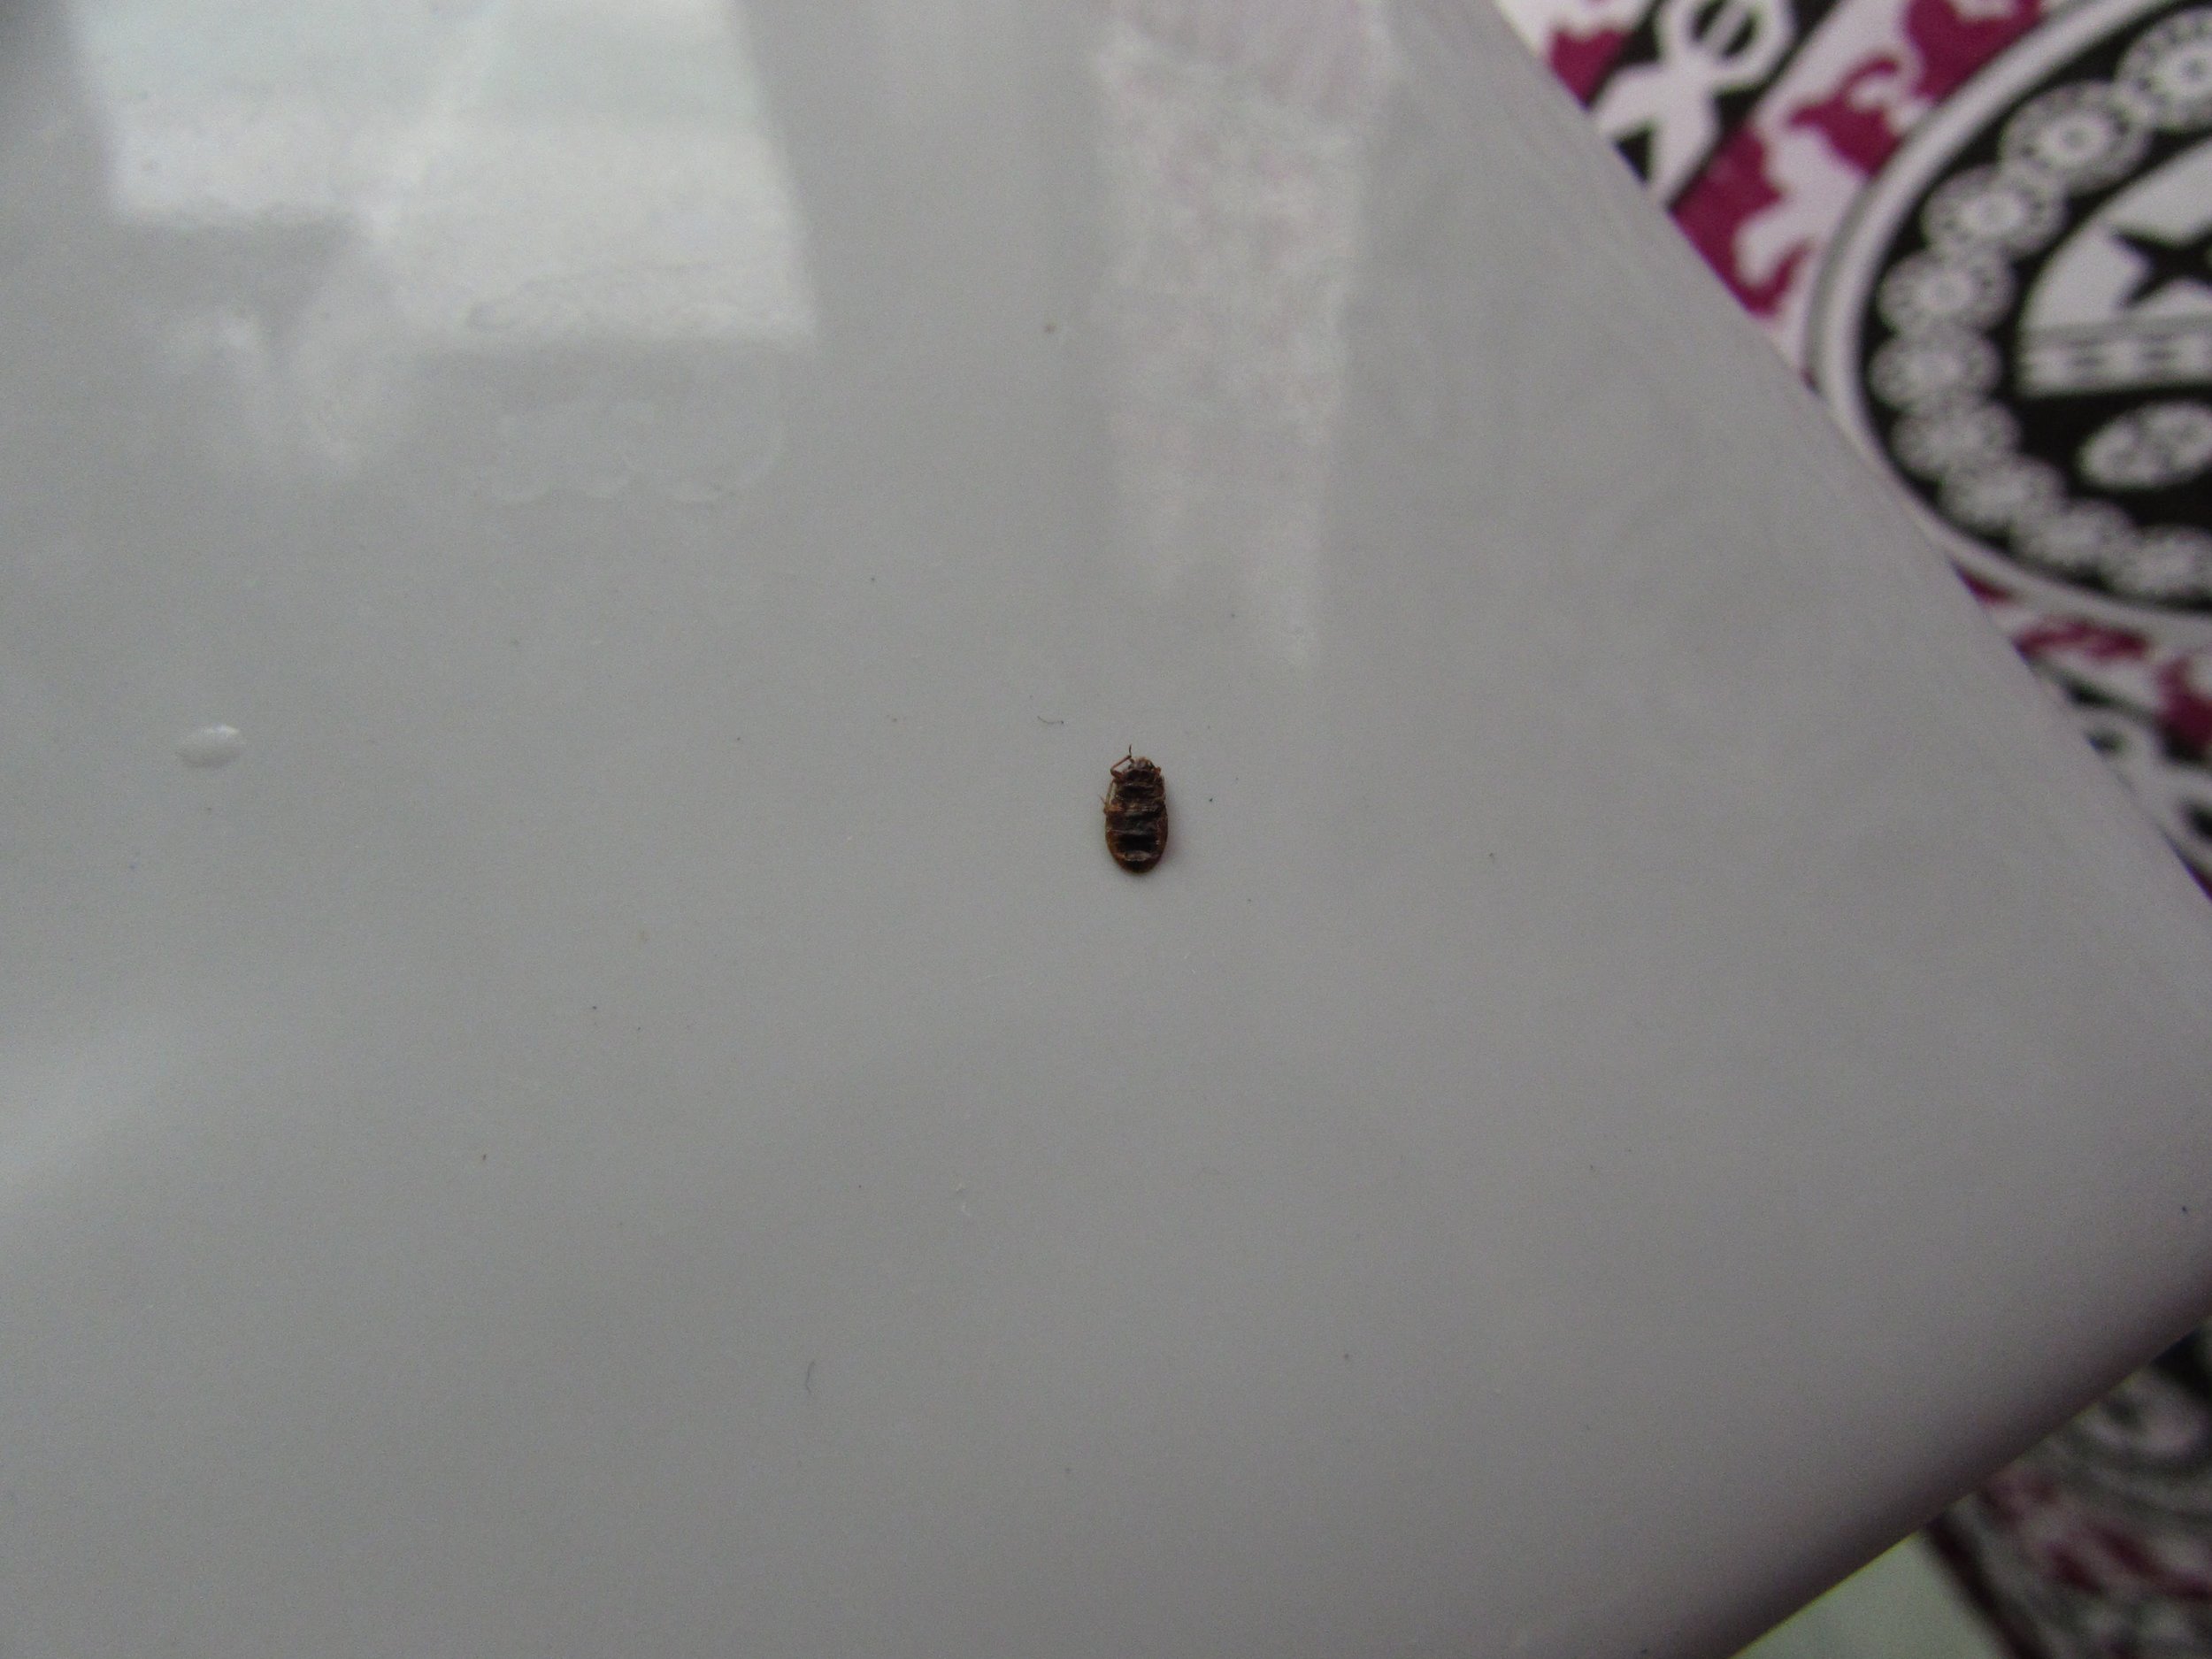 dead bed bugs in sofa